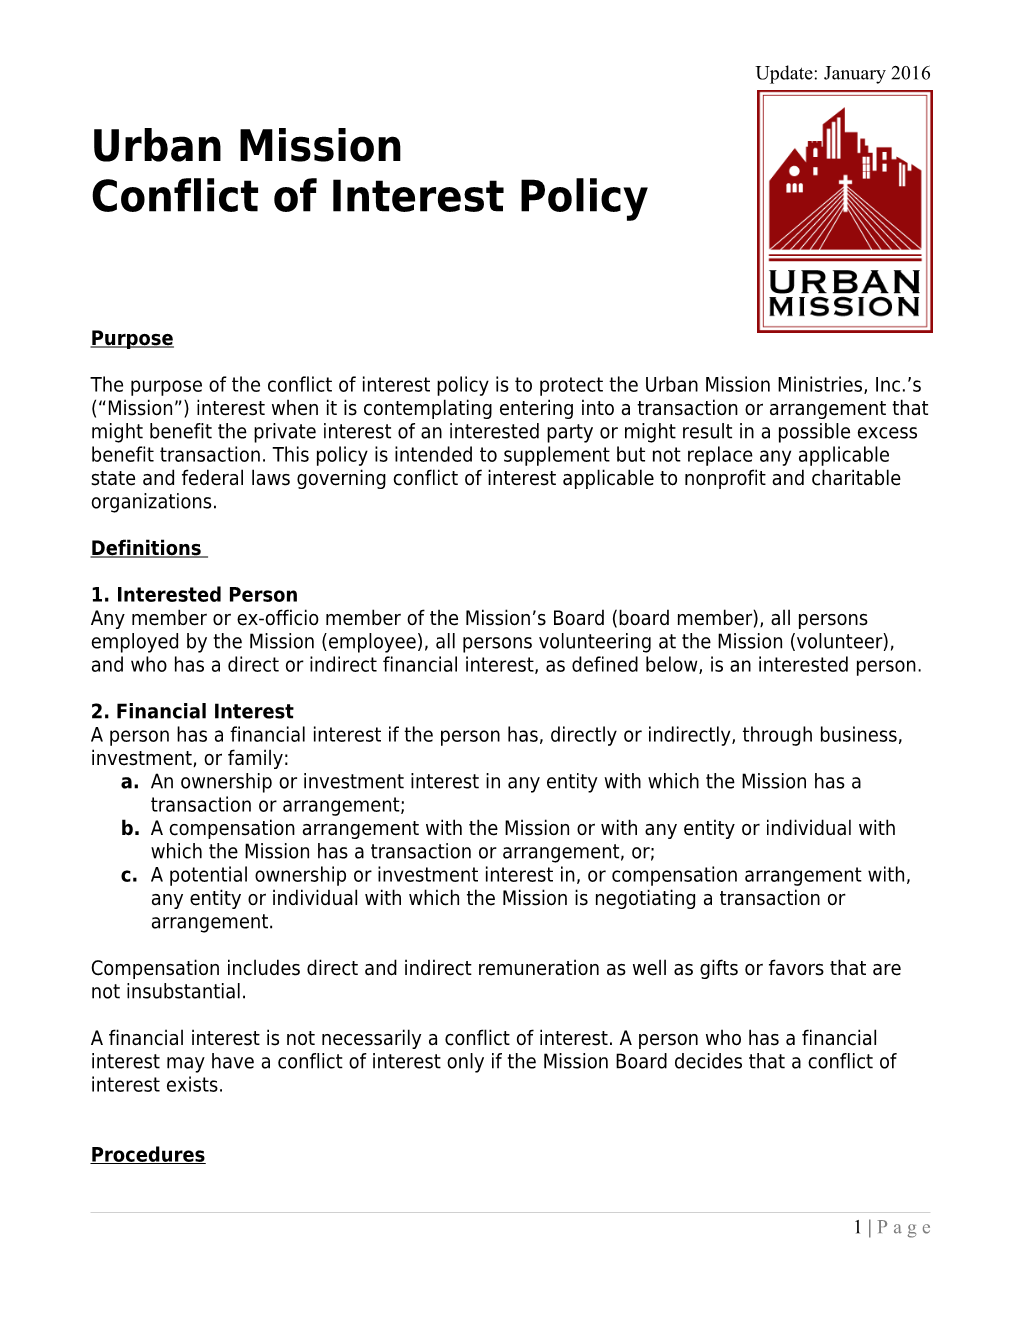 2011 Urban Mission Conflict of Interest Policy